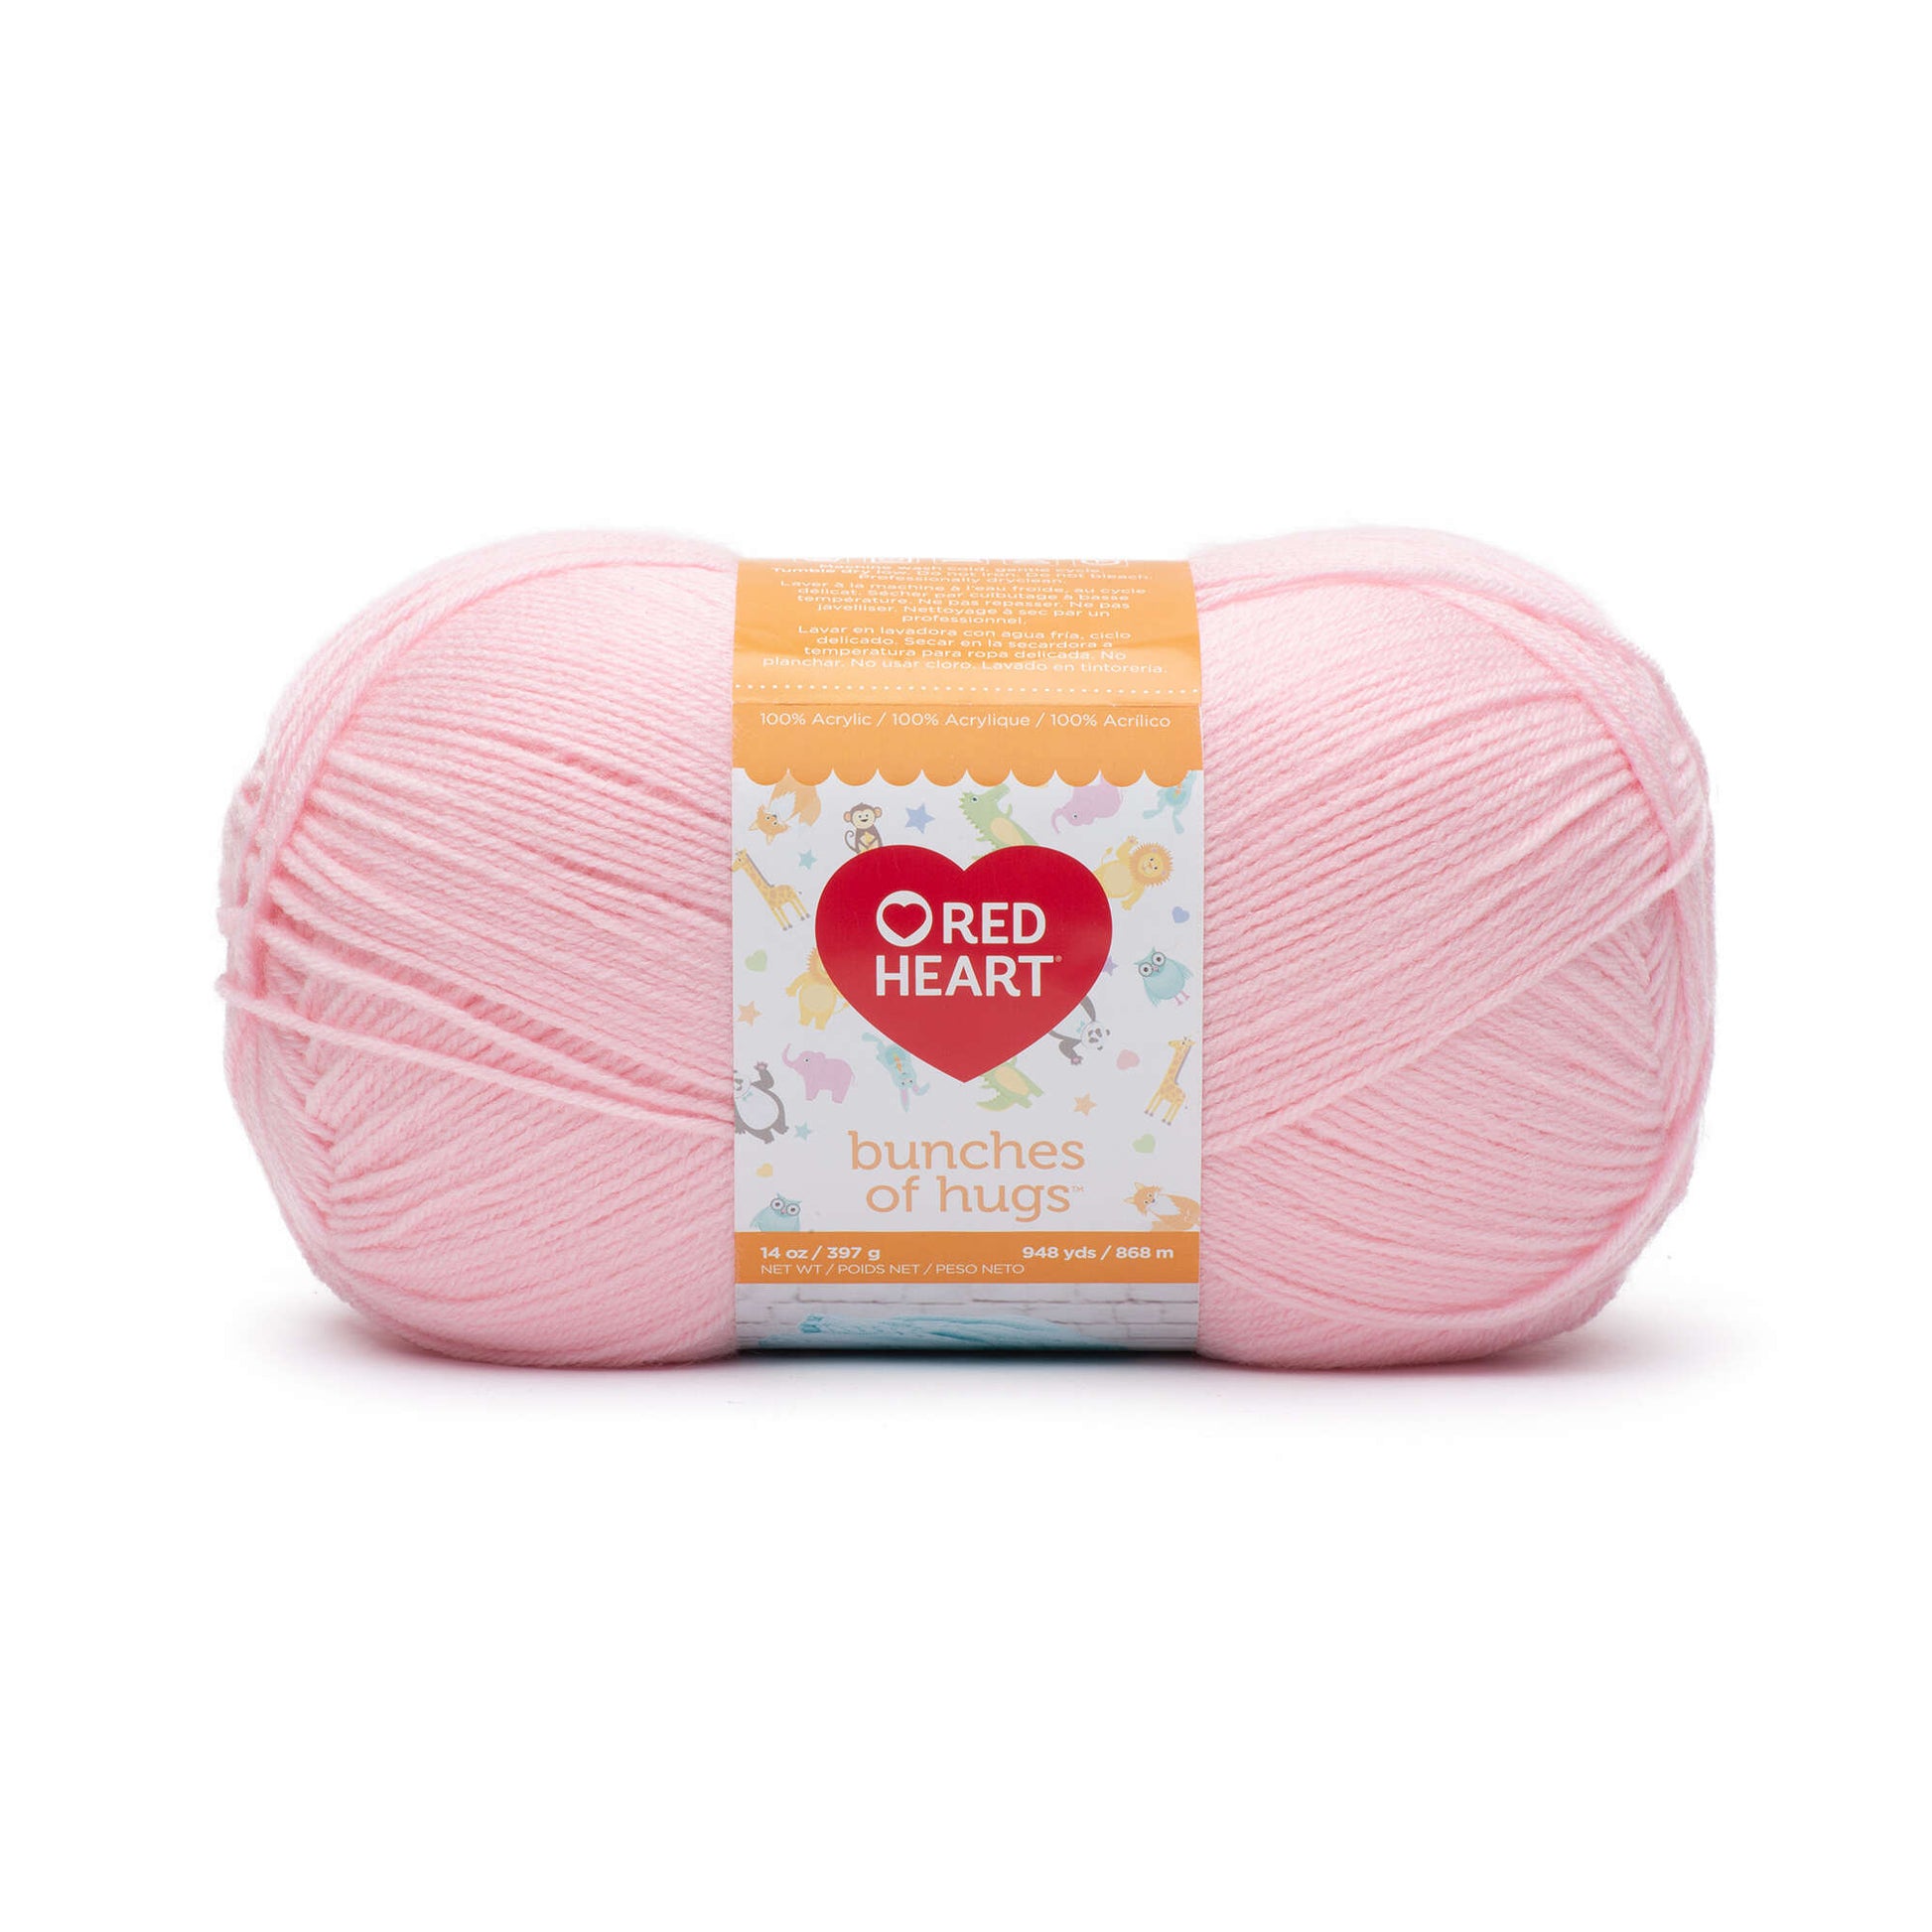 Red Heart Bunches of Hugs Yarn - Discontinued shades